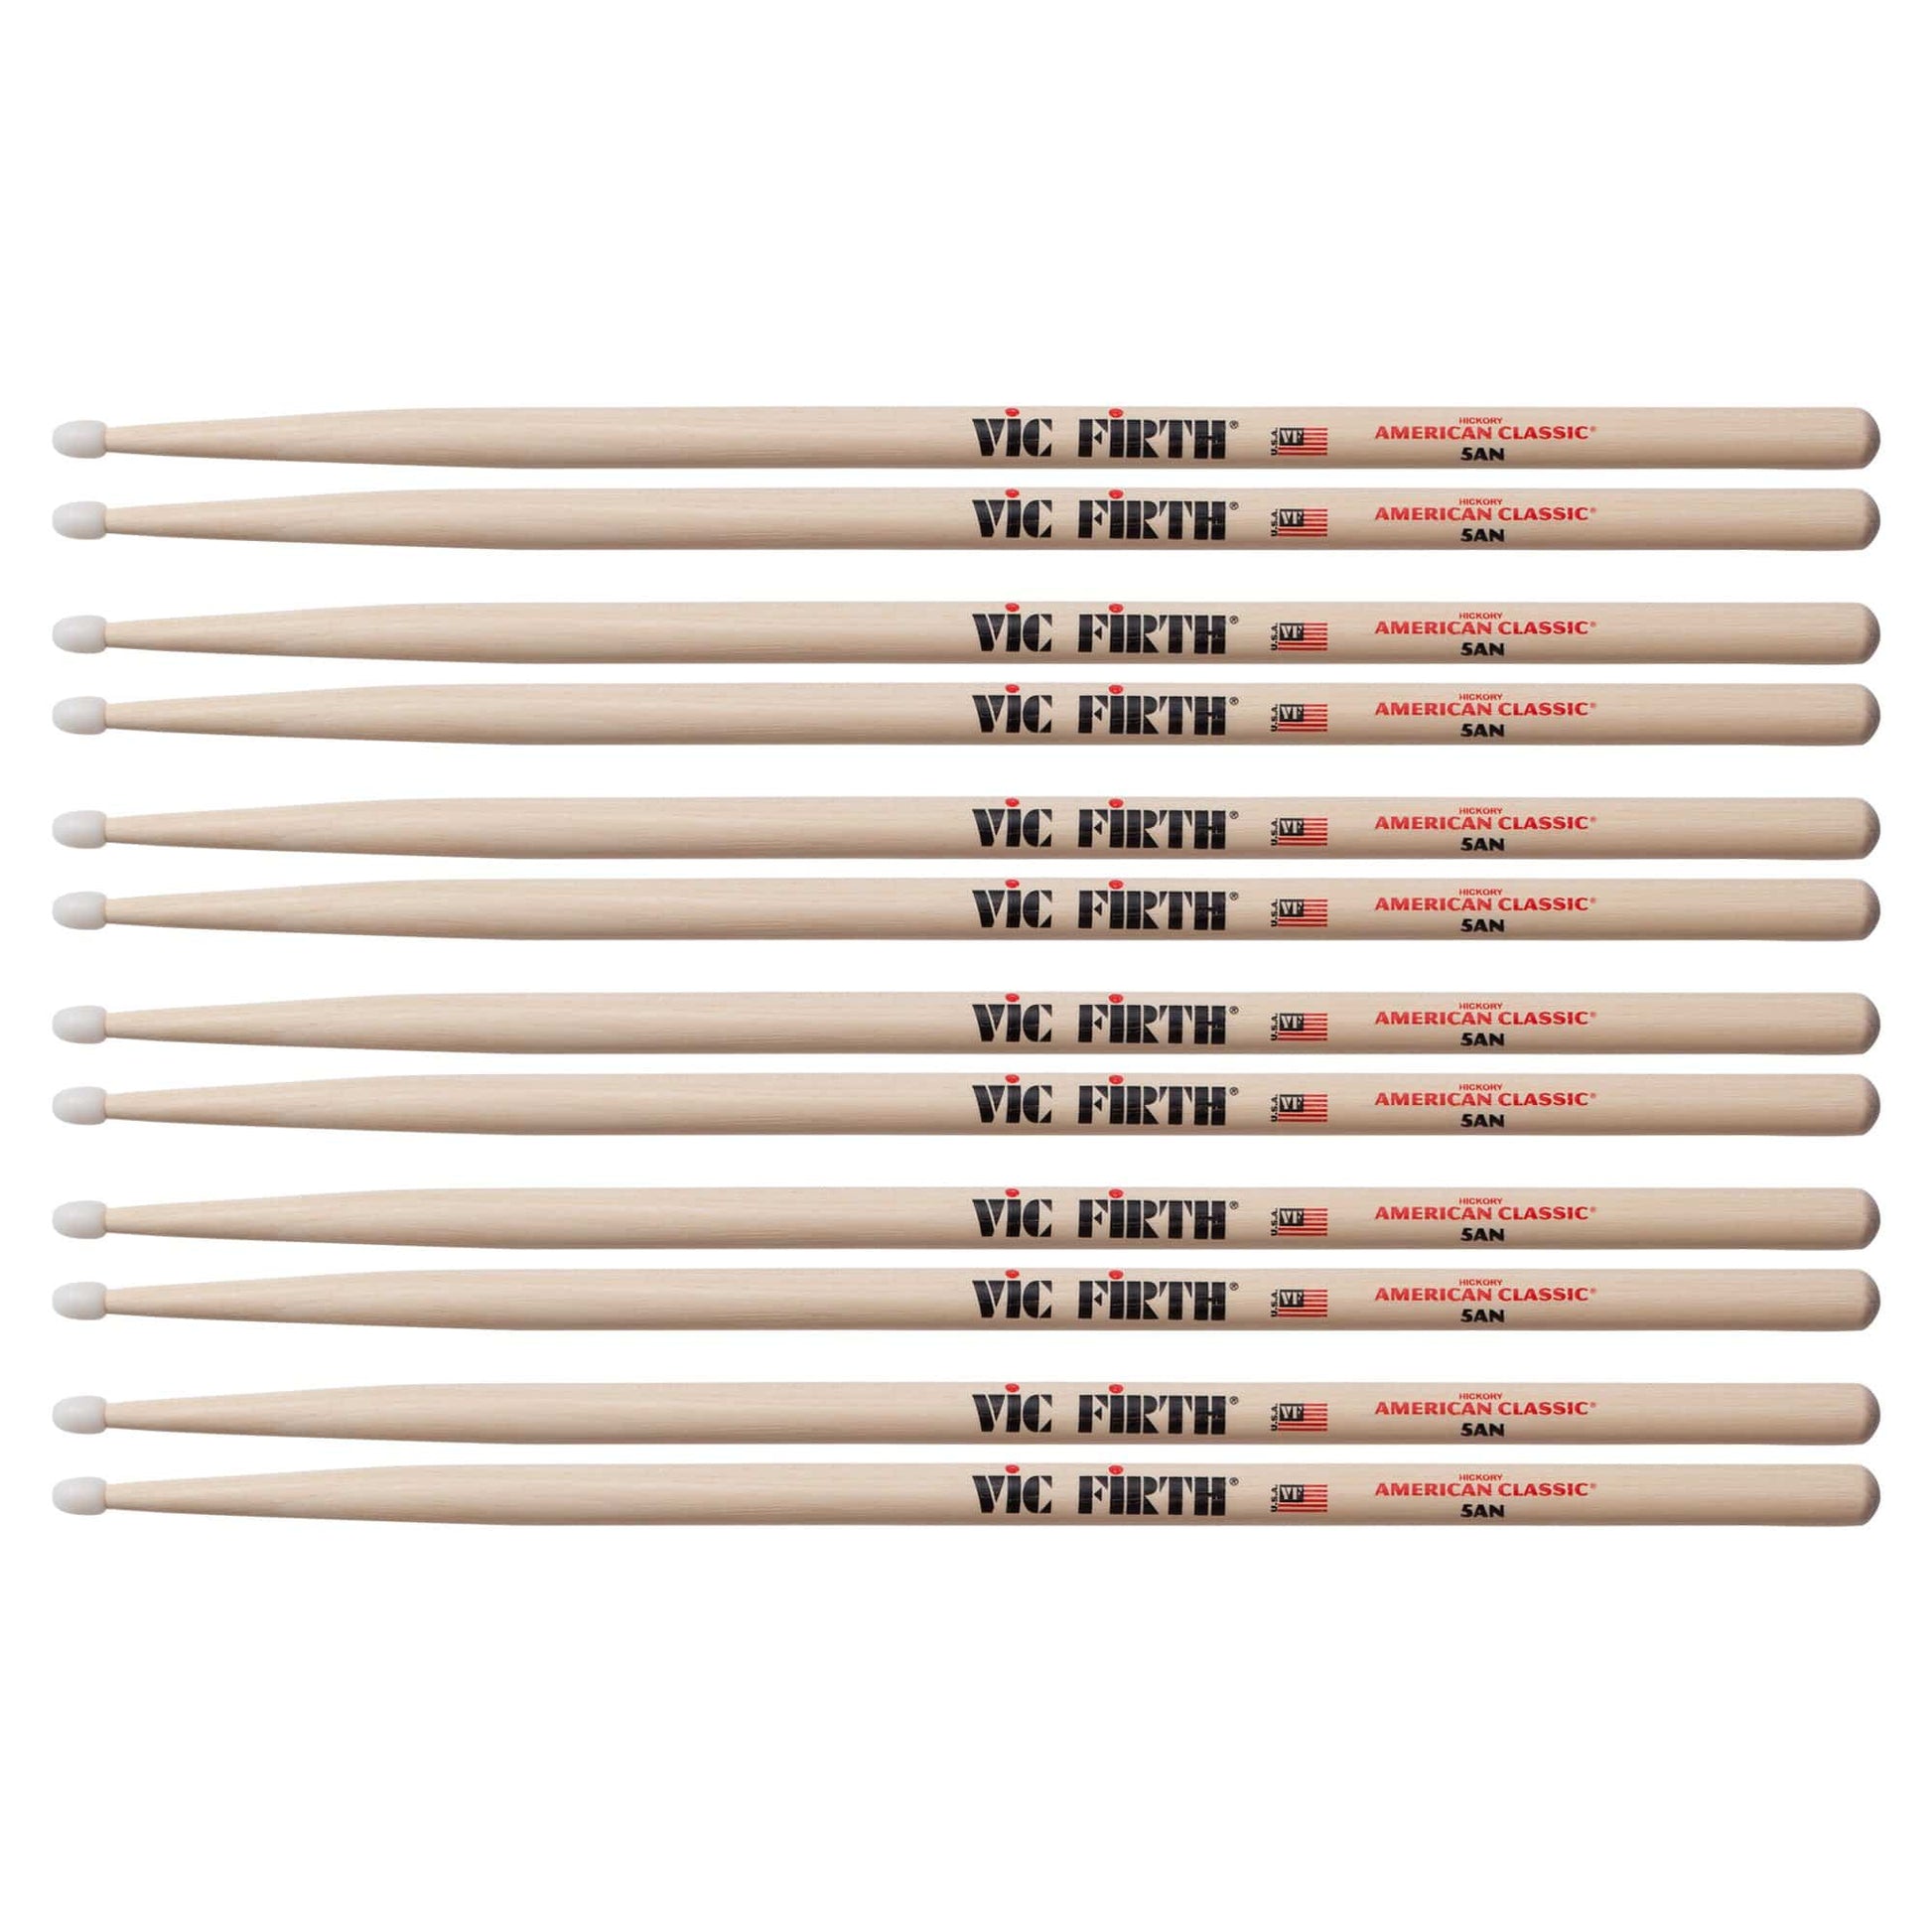 Vic Firth American Classic 5A Nylon Tip Drum Sticks (6 Pair Bundle) Drums and Percussion / Parts and Accessories / Drum Sticks and Mallets